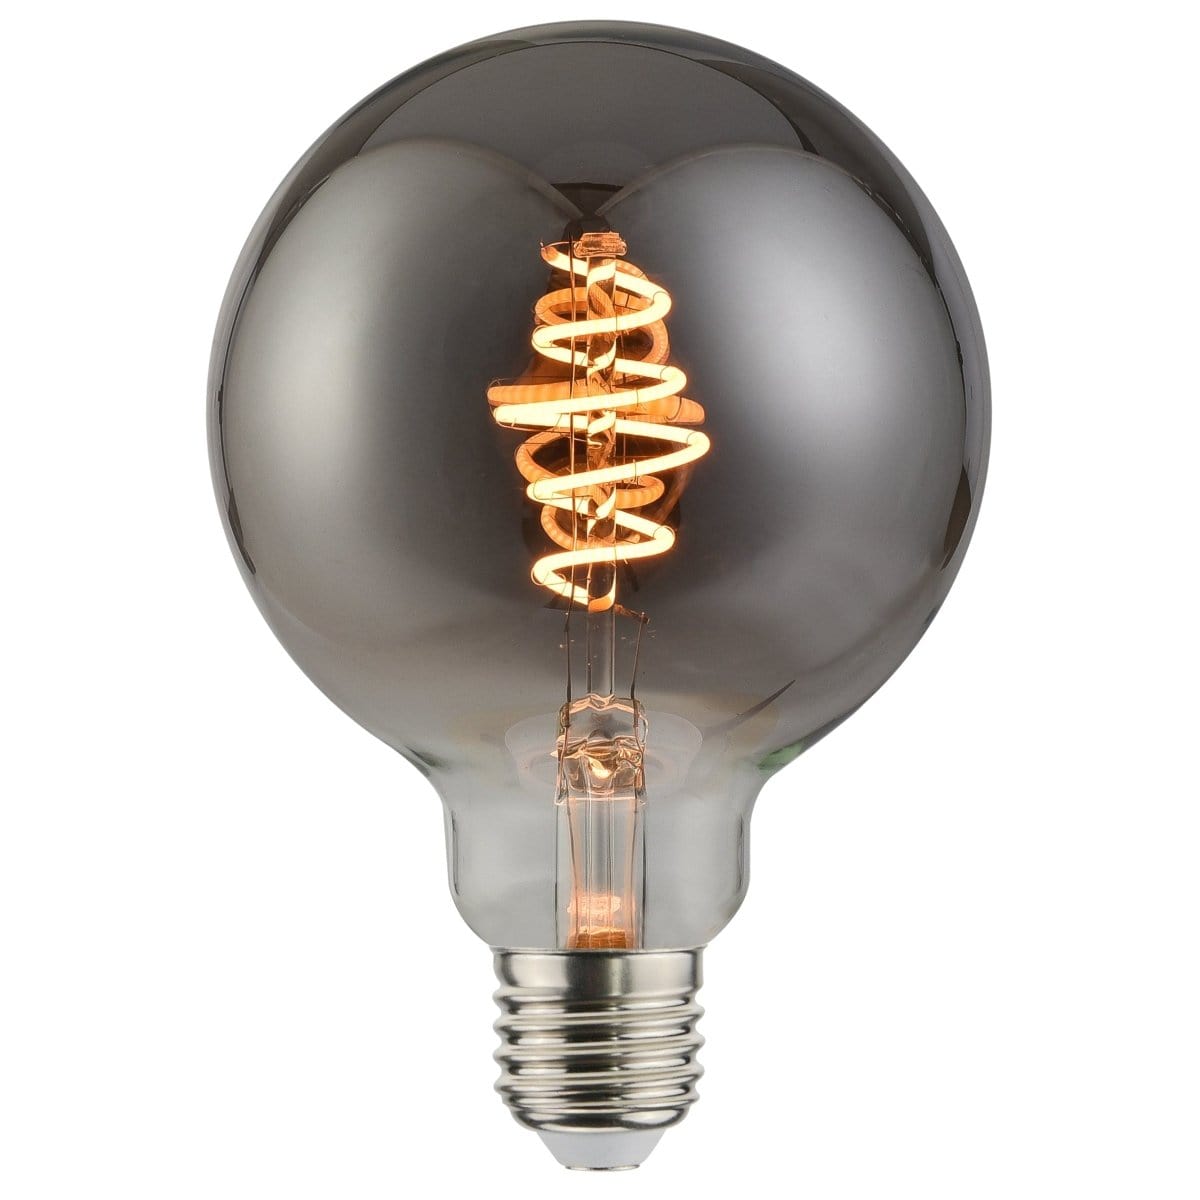 Heavenly Chandeliers Light Bulbs Decorative, Dimmable E27 G125 Light Bulb, Smoked